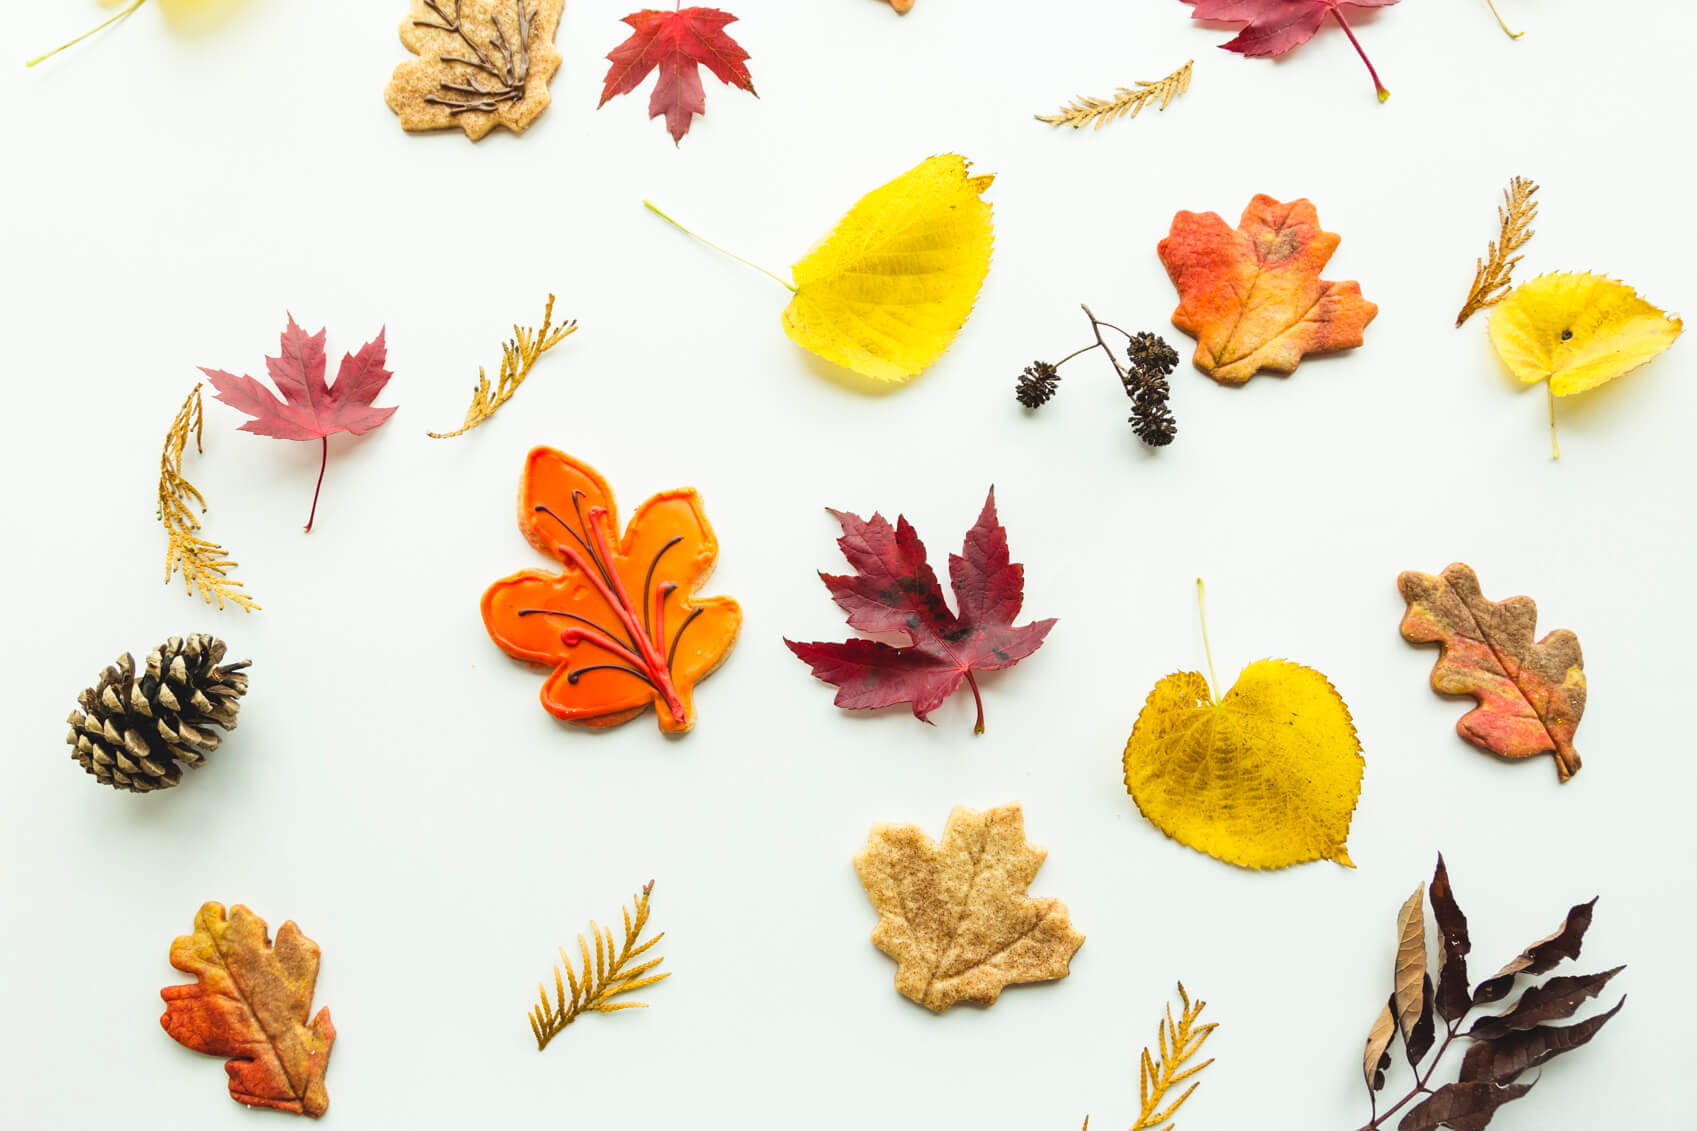 Let your creativity run wild with the autumn inspiration.